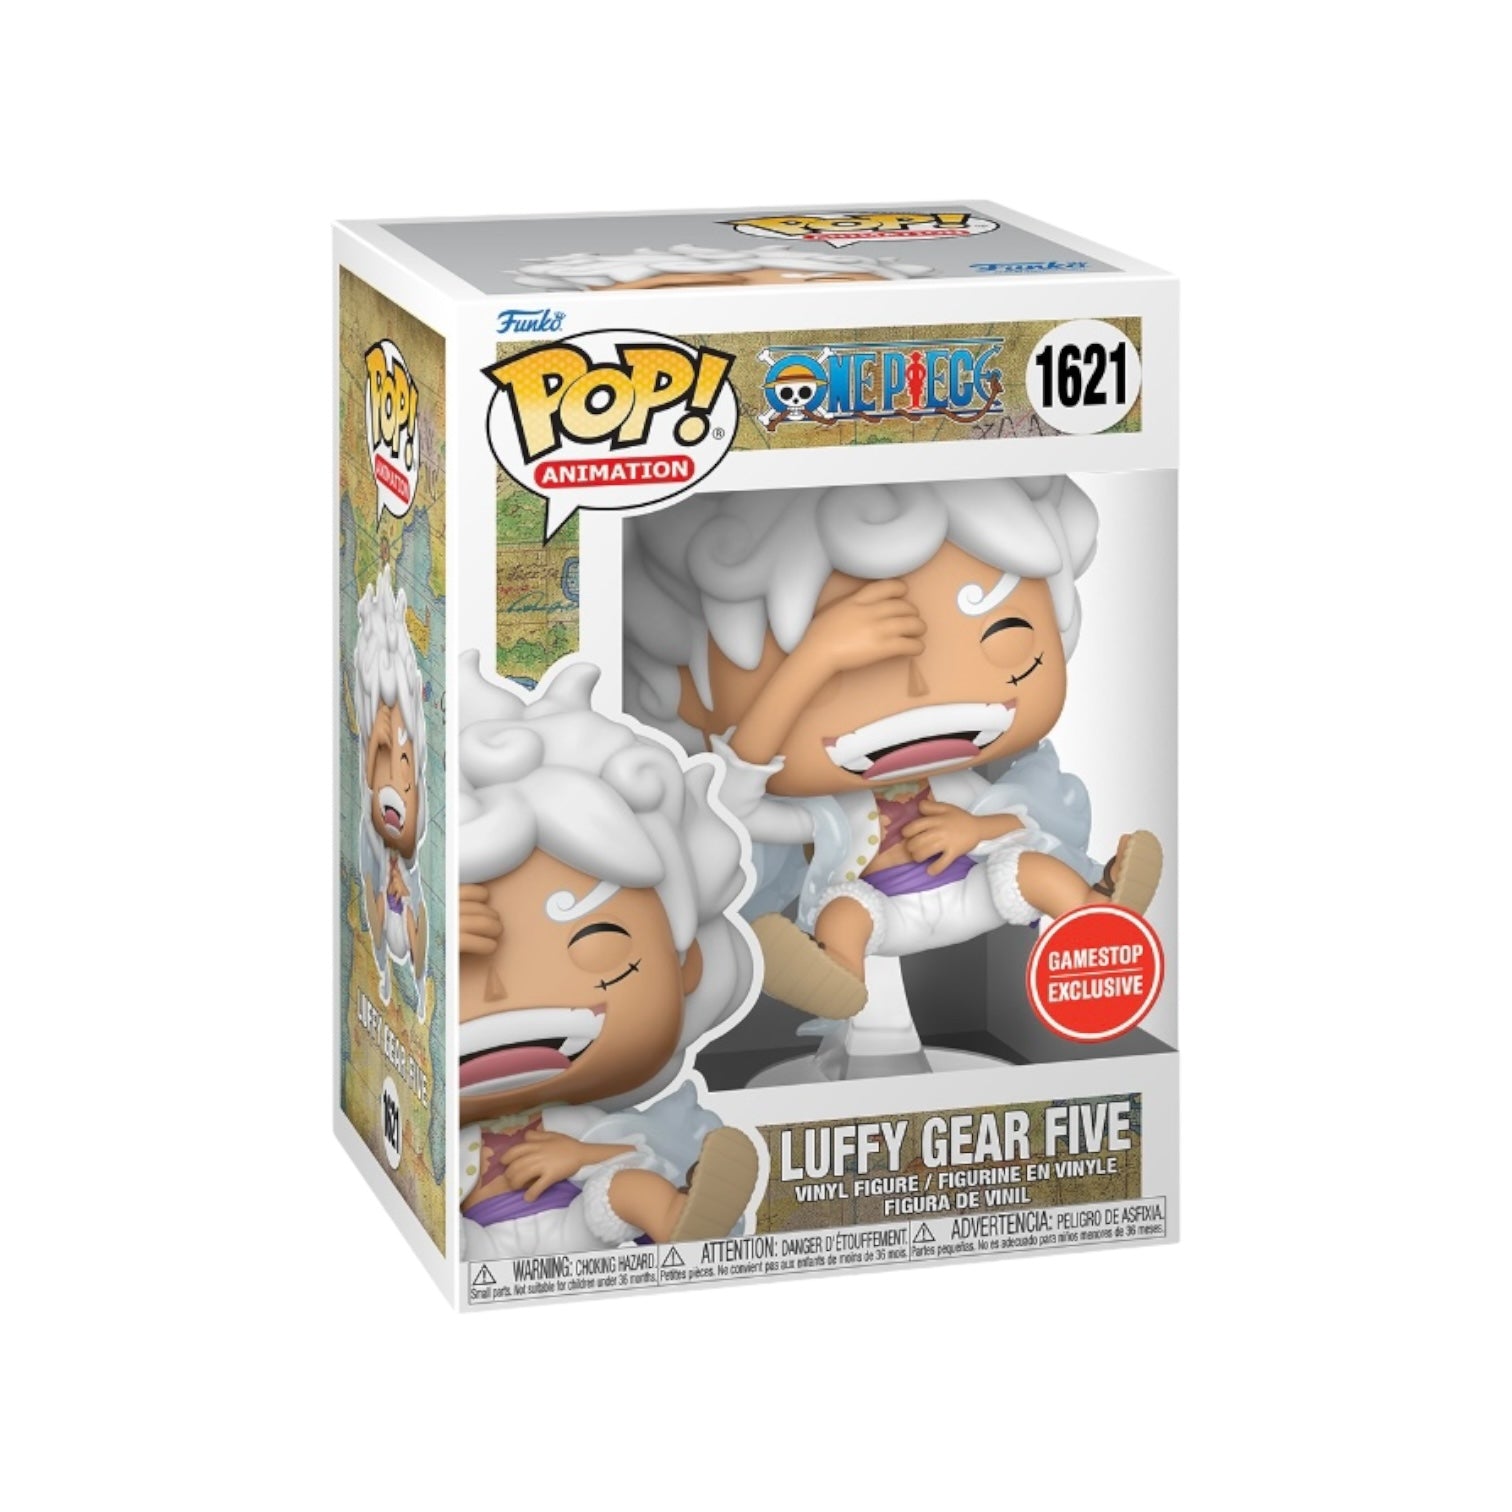 Luffy Gear Five #1621 (Laughing) Funko Pop! - One Piece - GameStop Exclusive